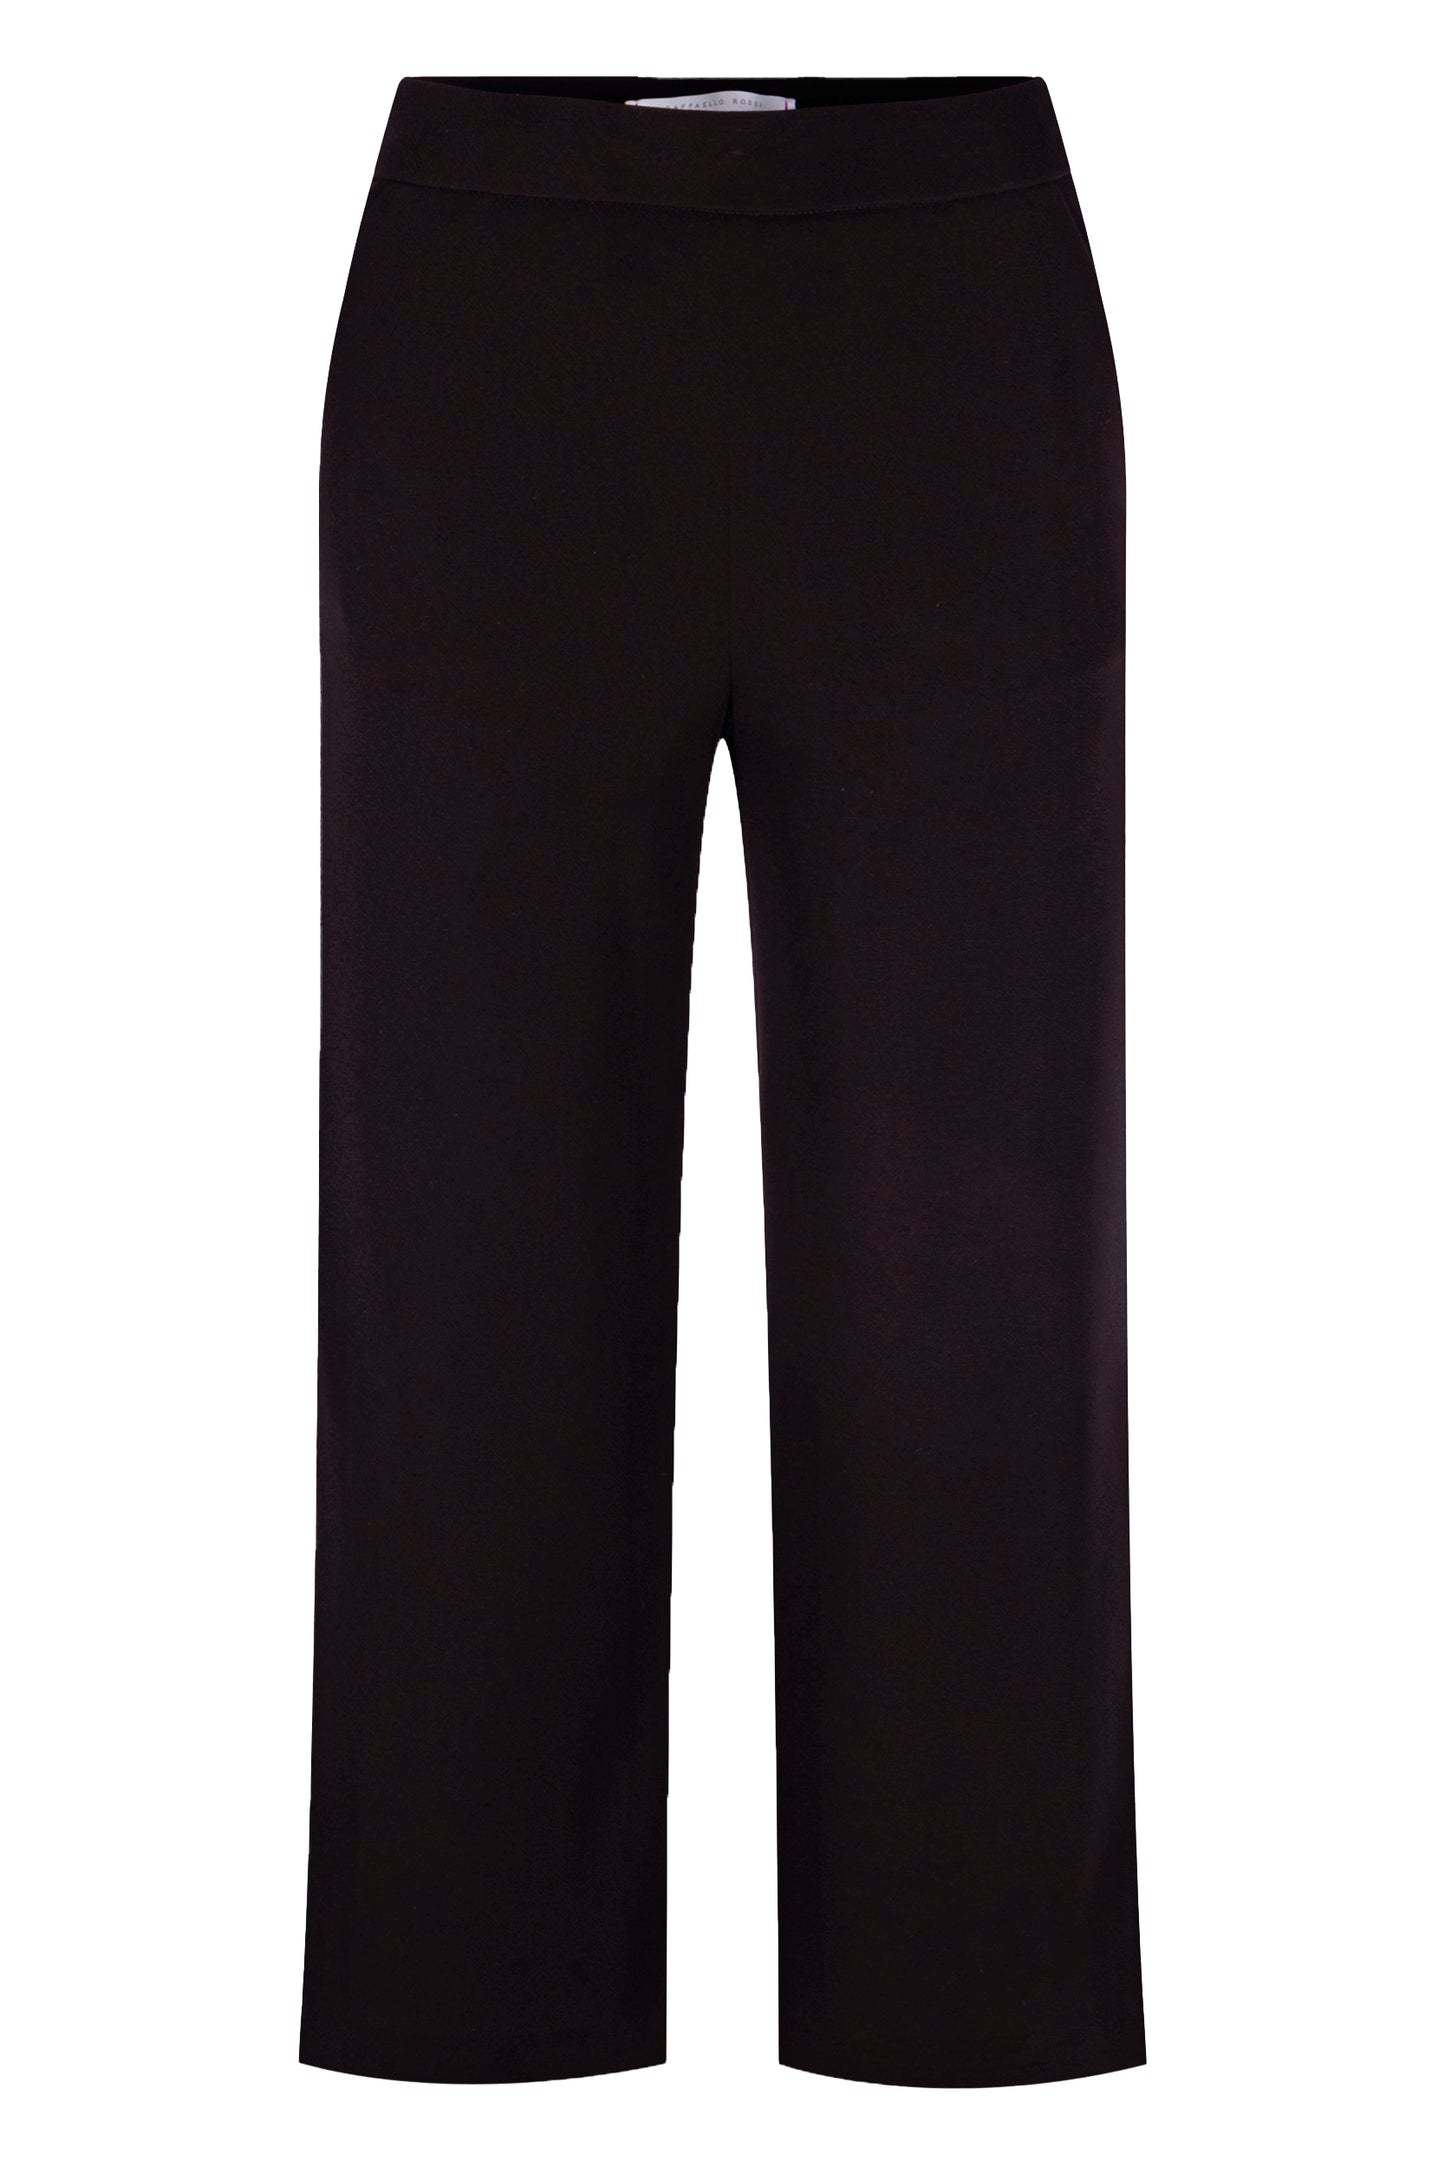 Gallery Couture Ponte Travel Pants